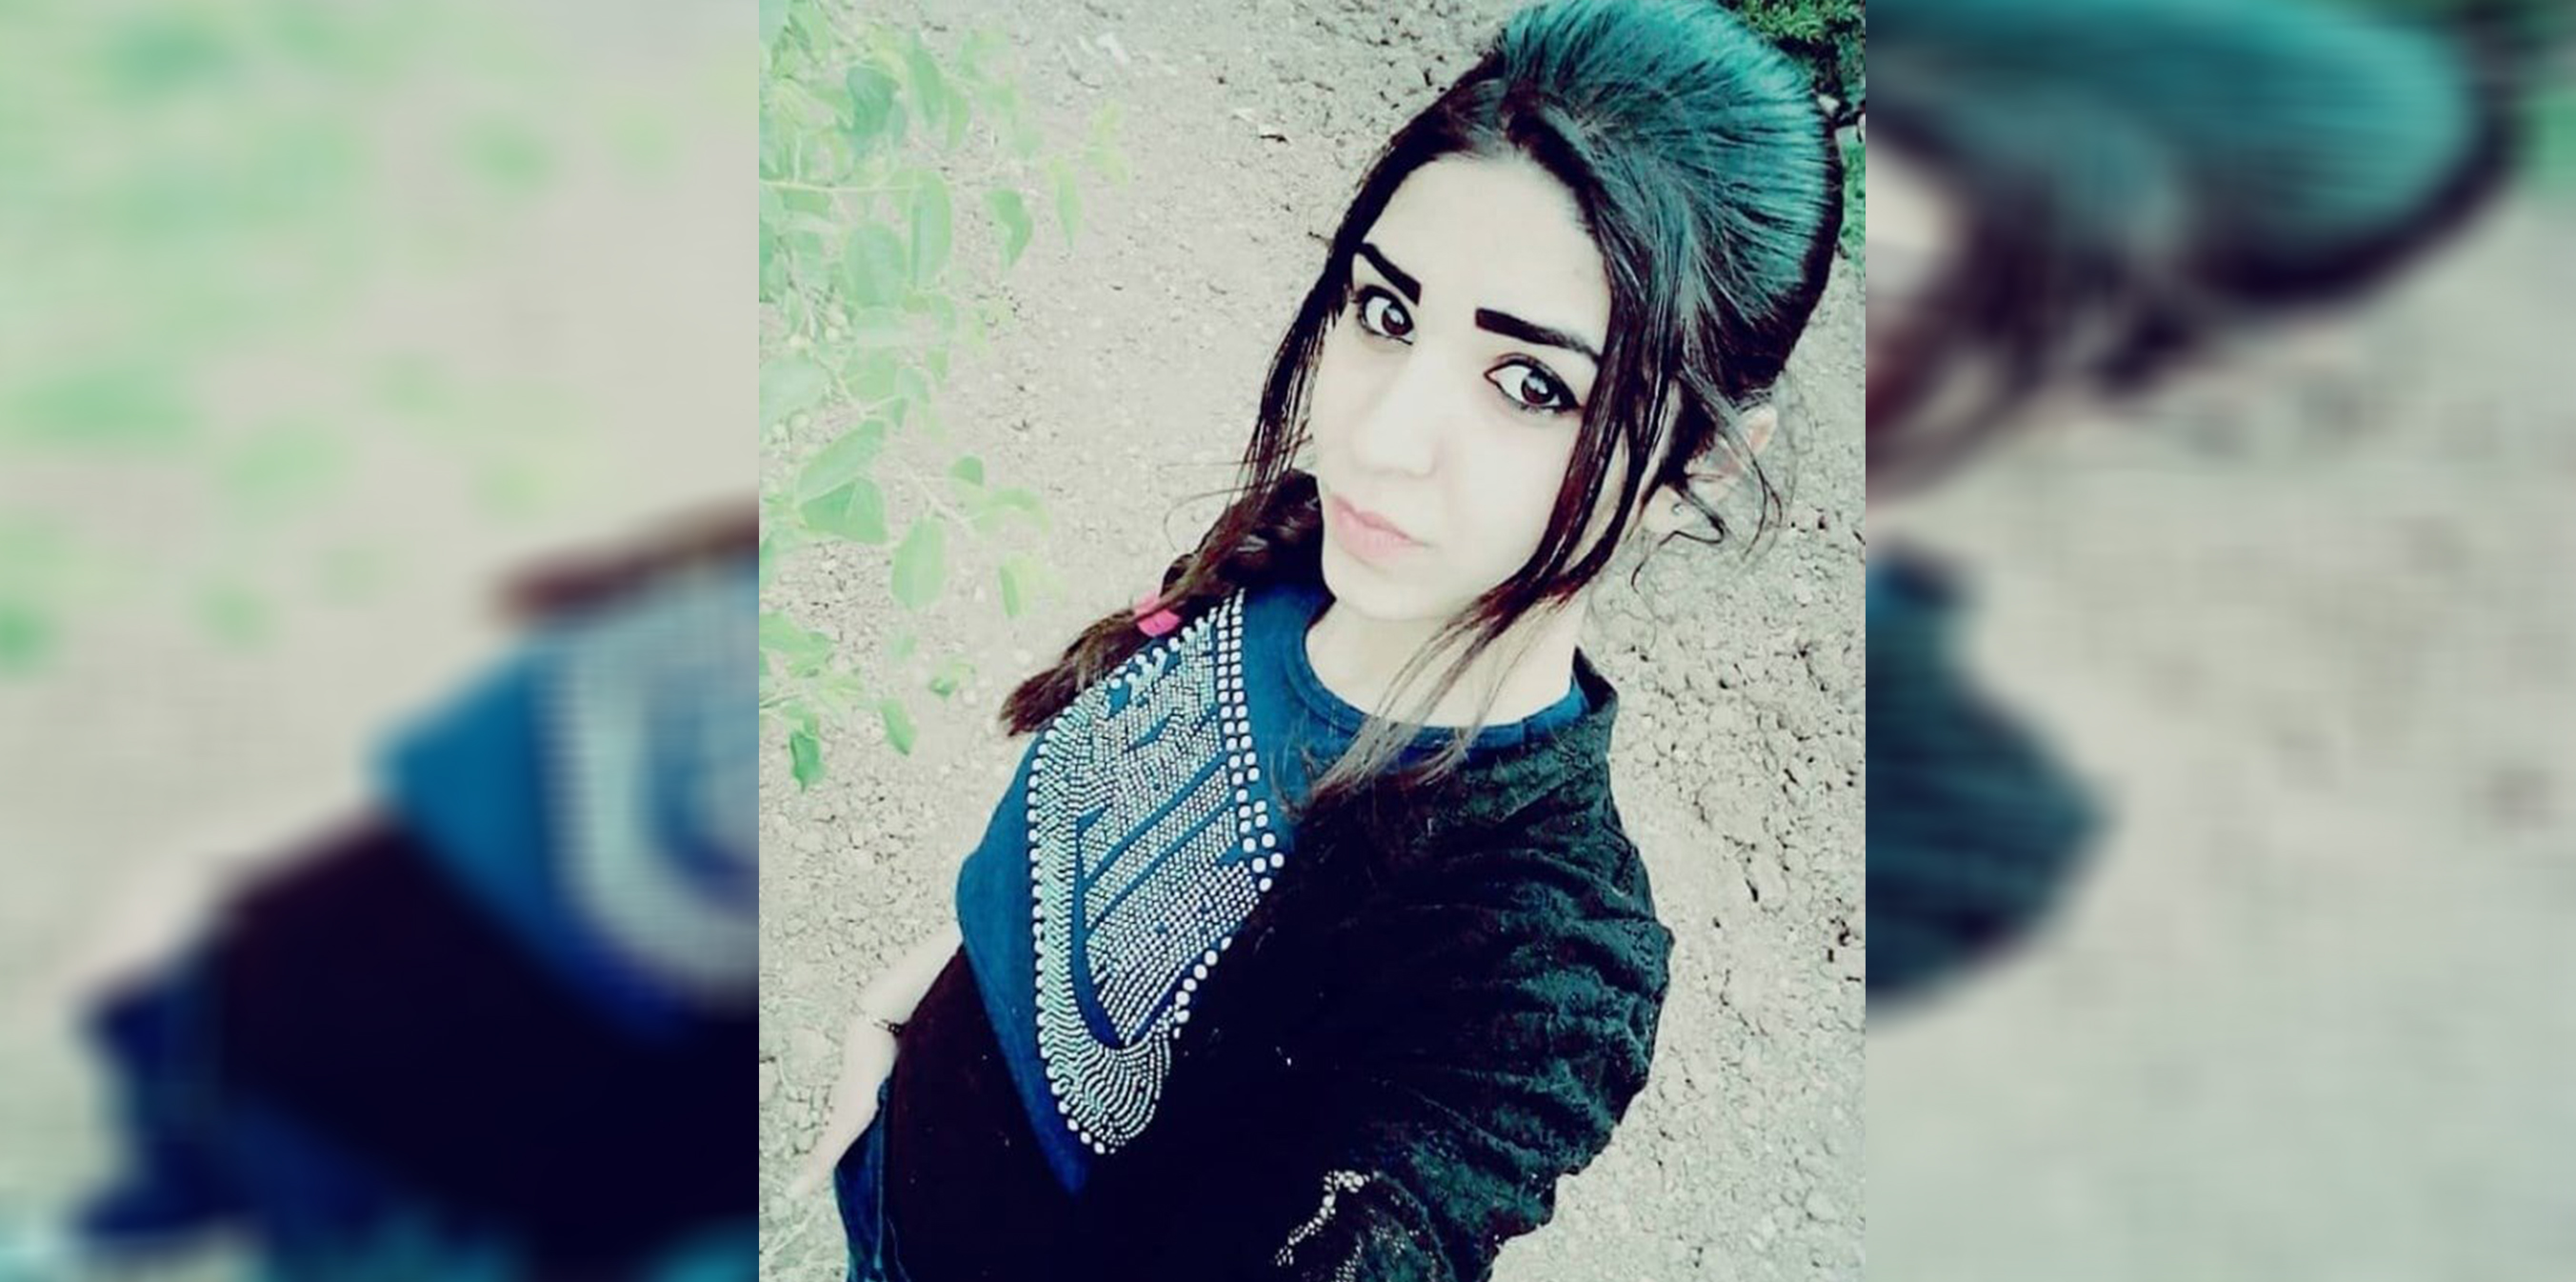 Turkey-backed mercenaries kidnap a young girl in Afrin